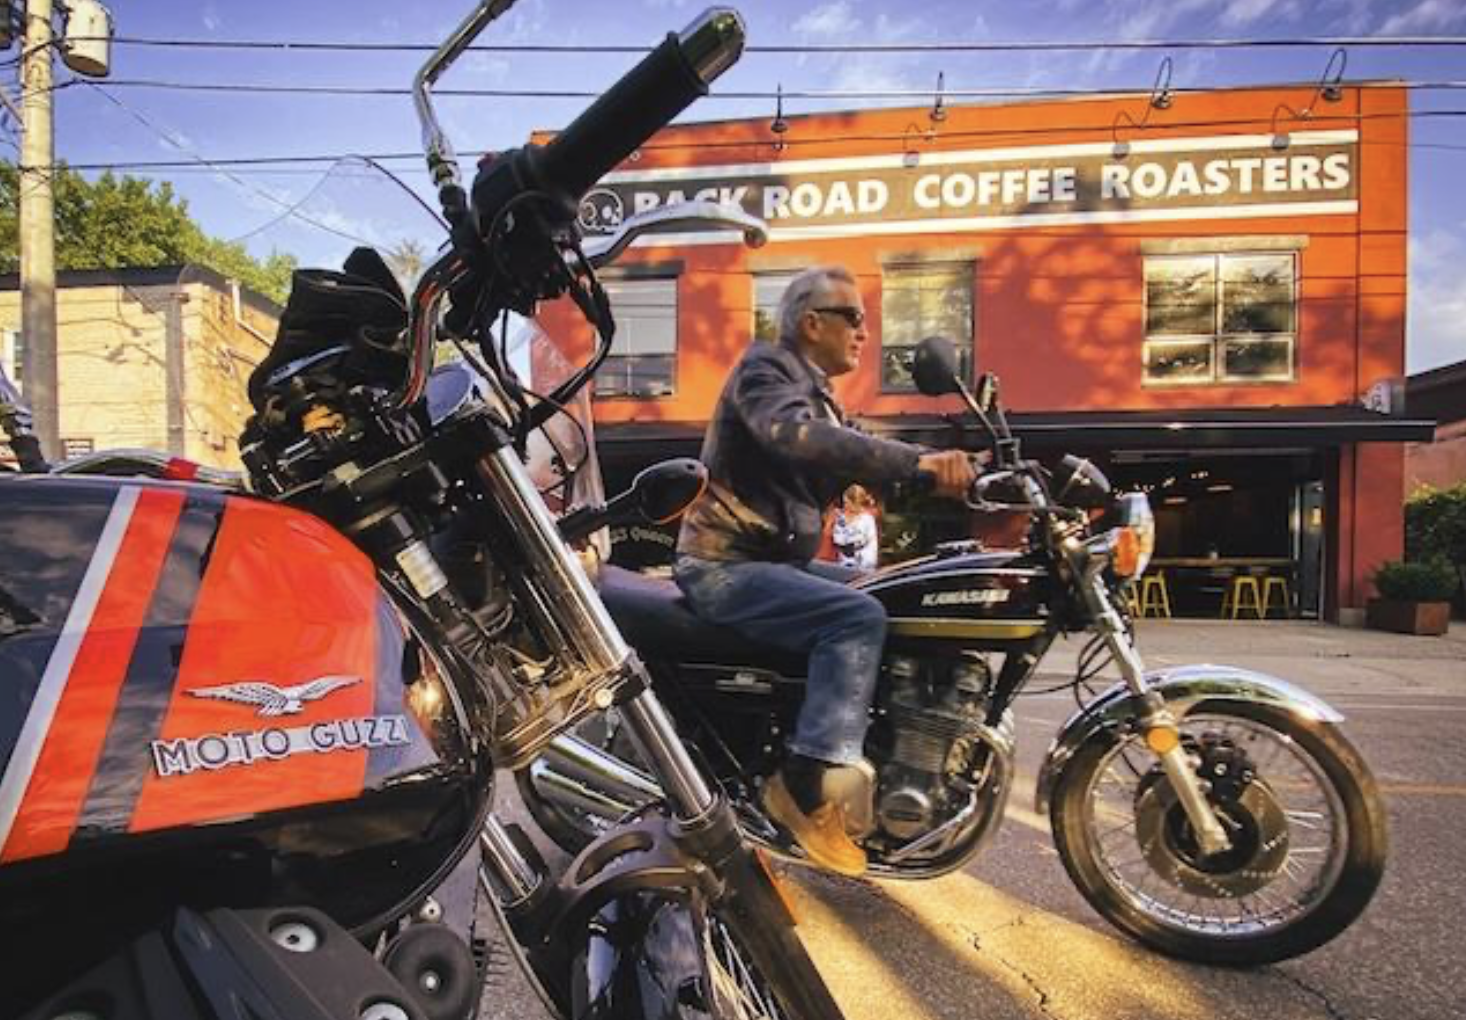 two motorcyclists ride down the street in front of a red shop building bearing the sign "Back Road Coffee Roasters" on a summer morning.